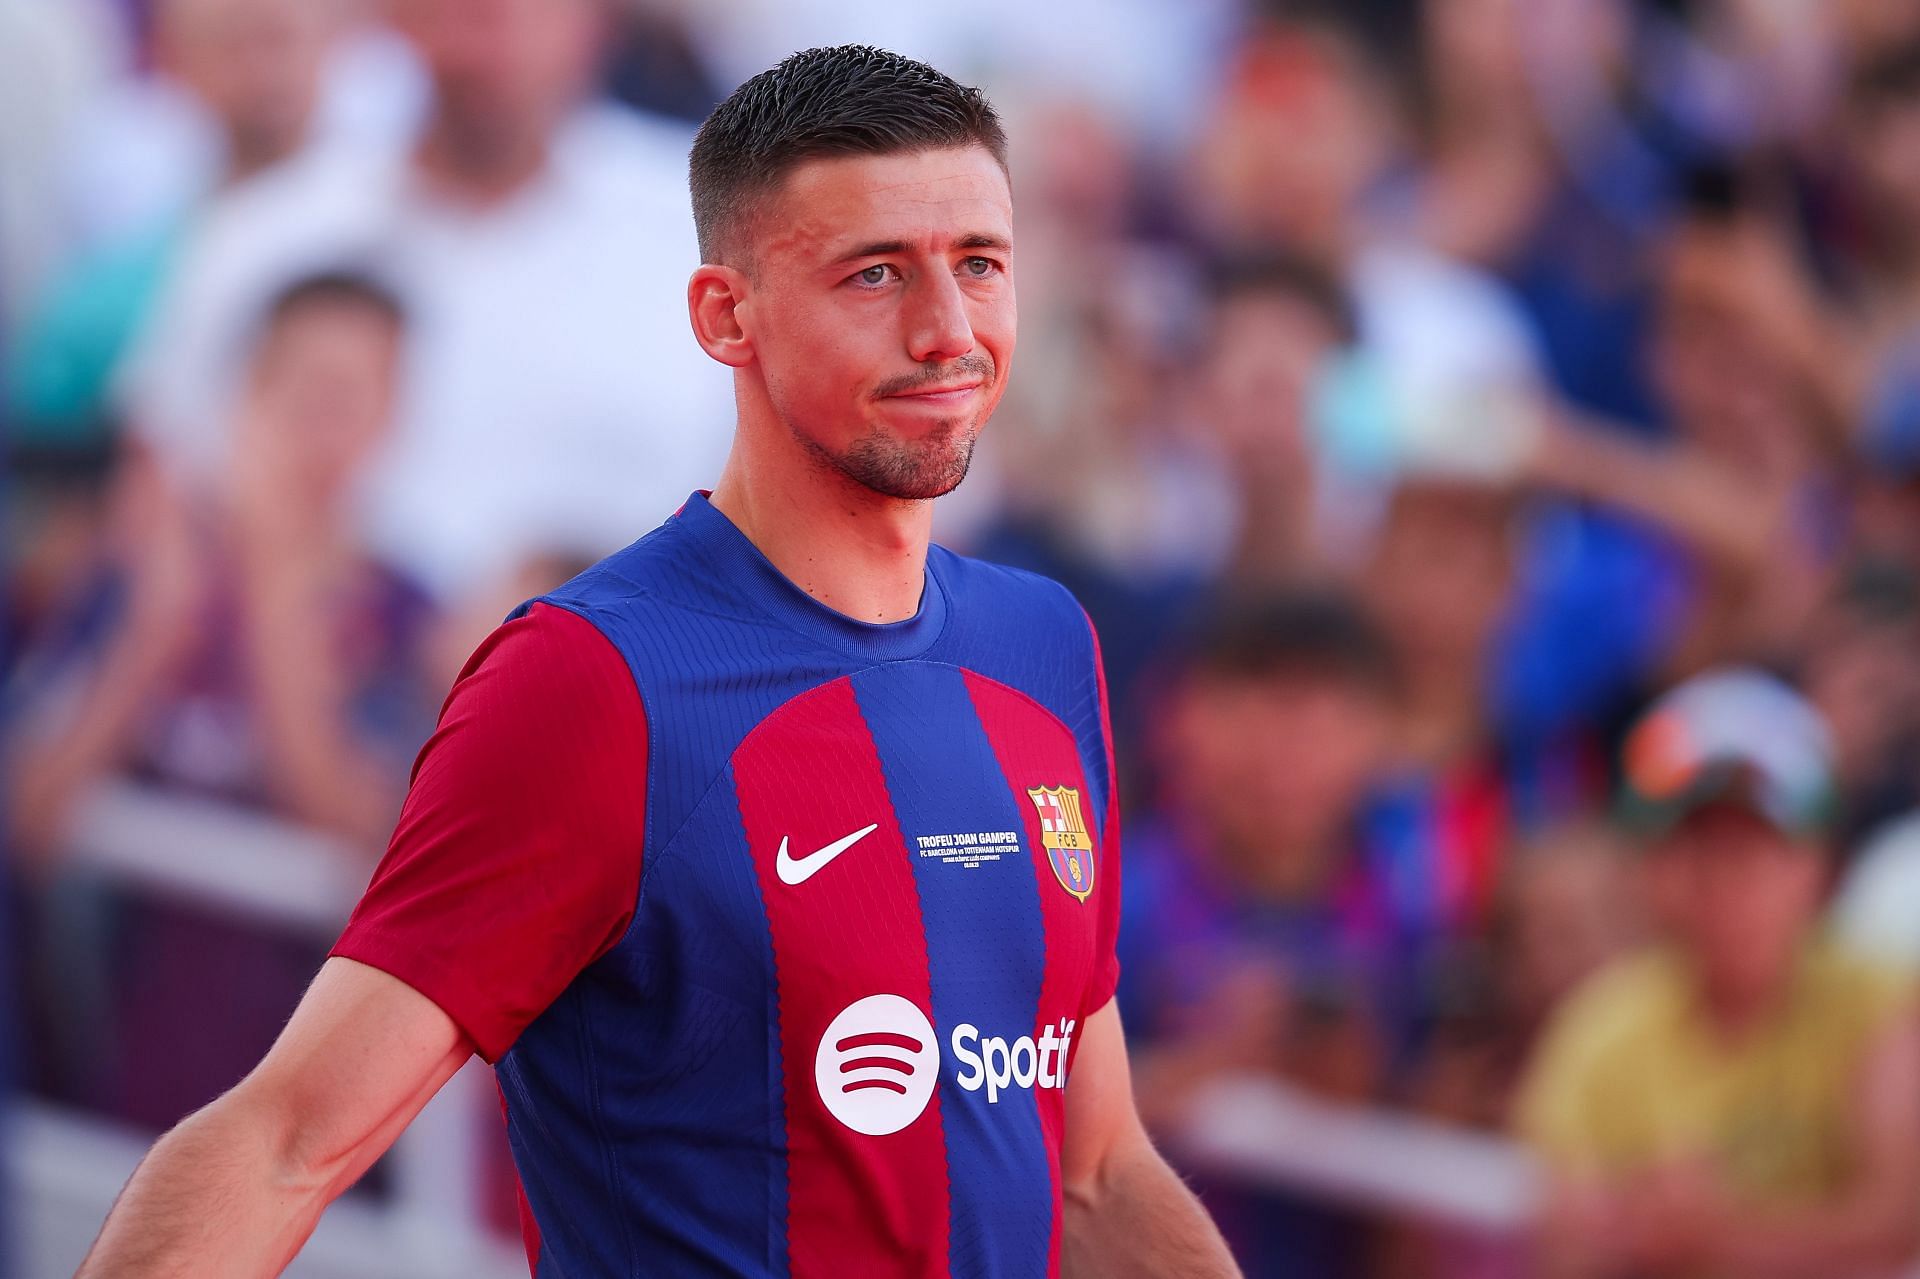 Clement Lenglet is likely to leave the Camp Nou this summer